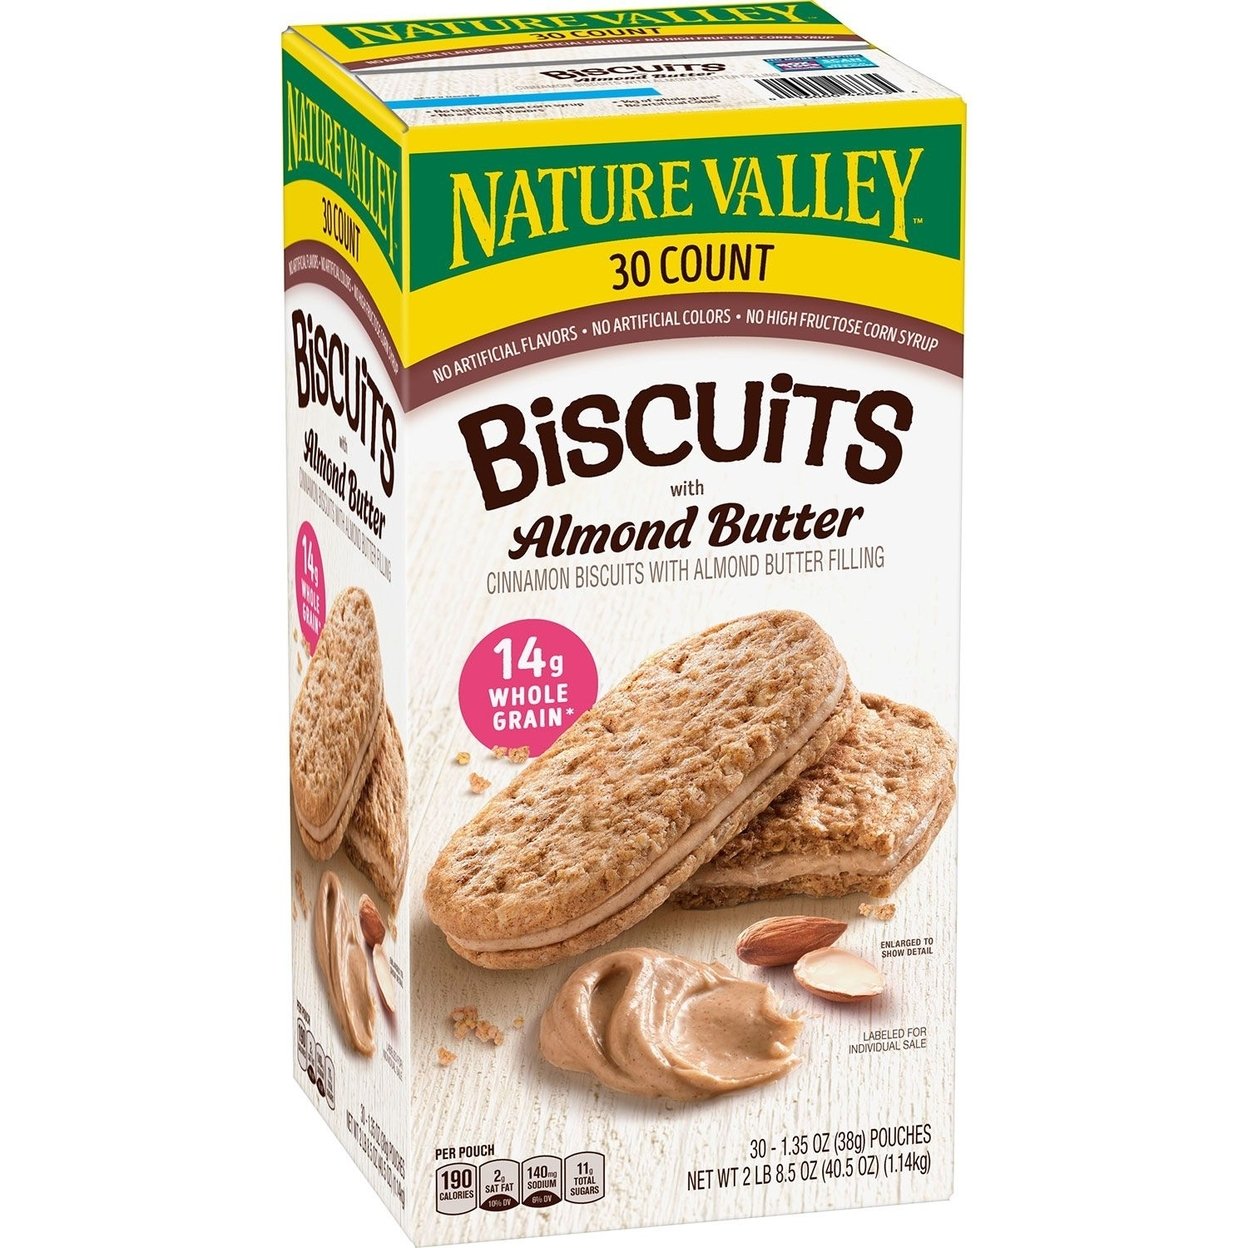 Nature Valley Biscuit Sandwich With Almond Butter (30 Count)